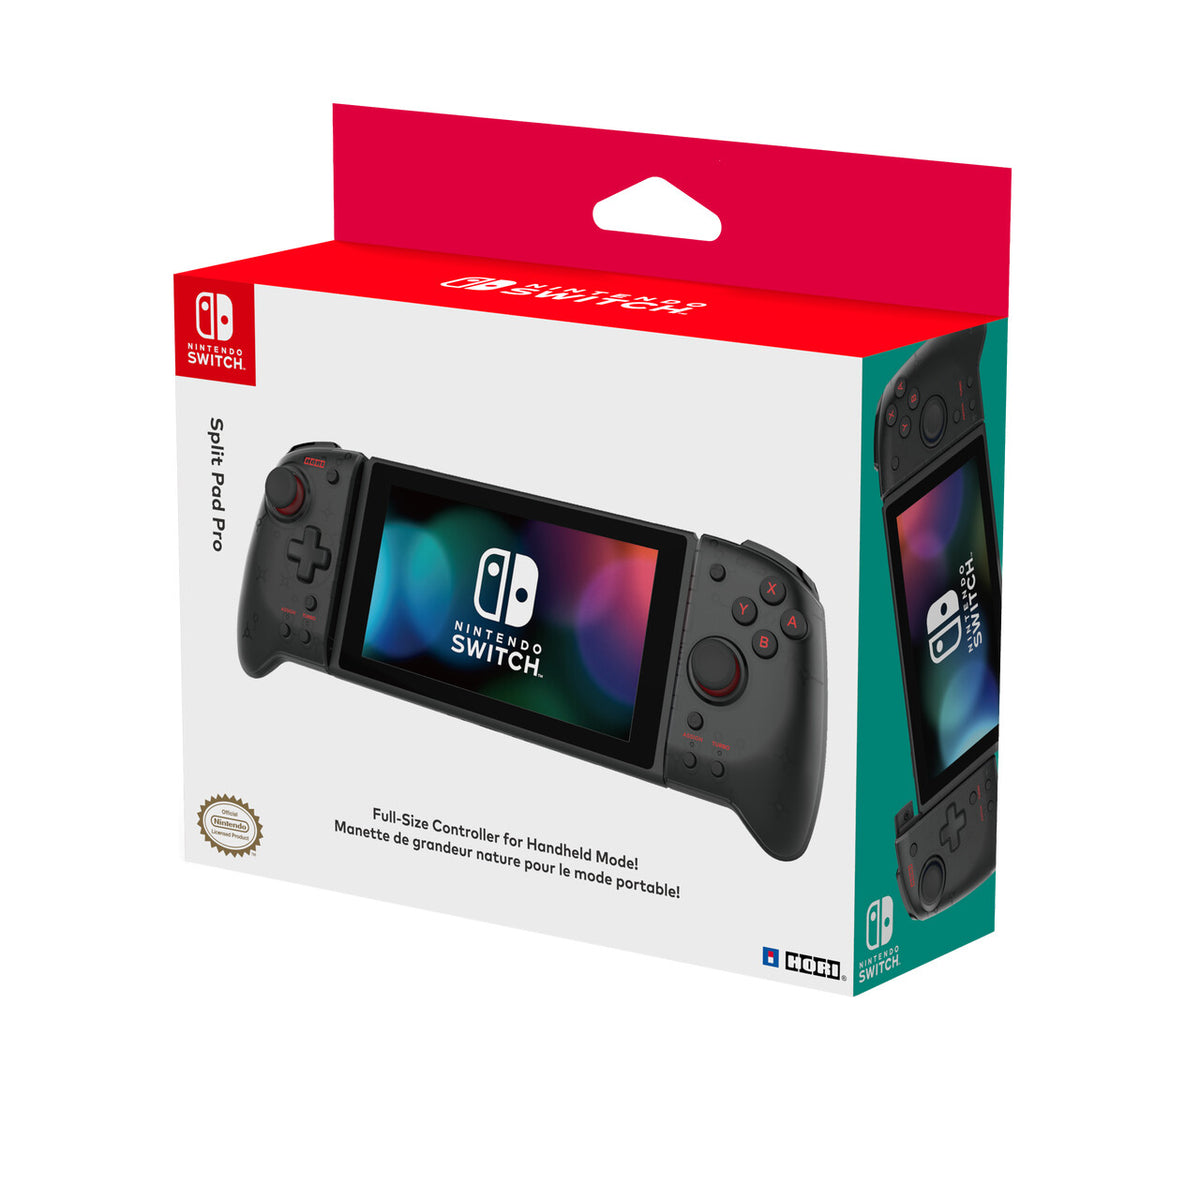 Hori Split Pad Pro -  Game Controllers for Nintendo Switch - Transparent Black Edition